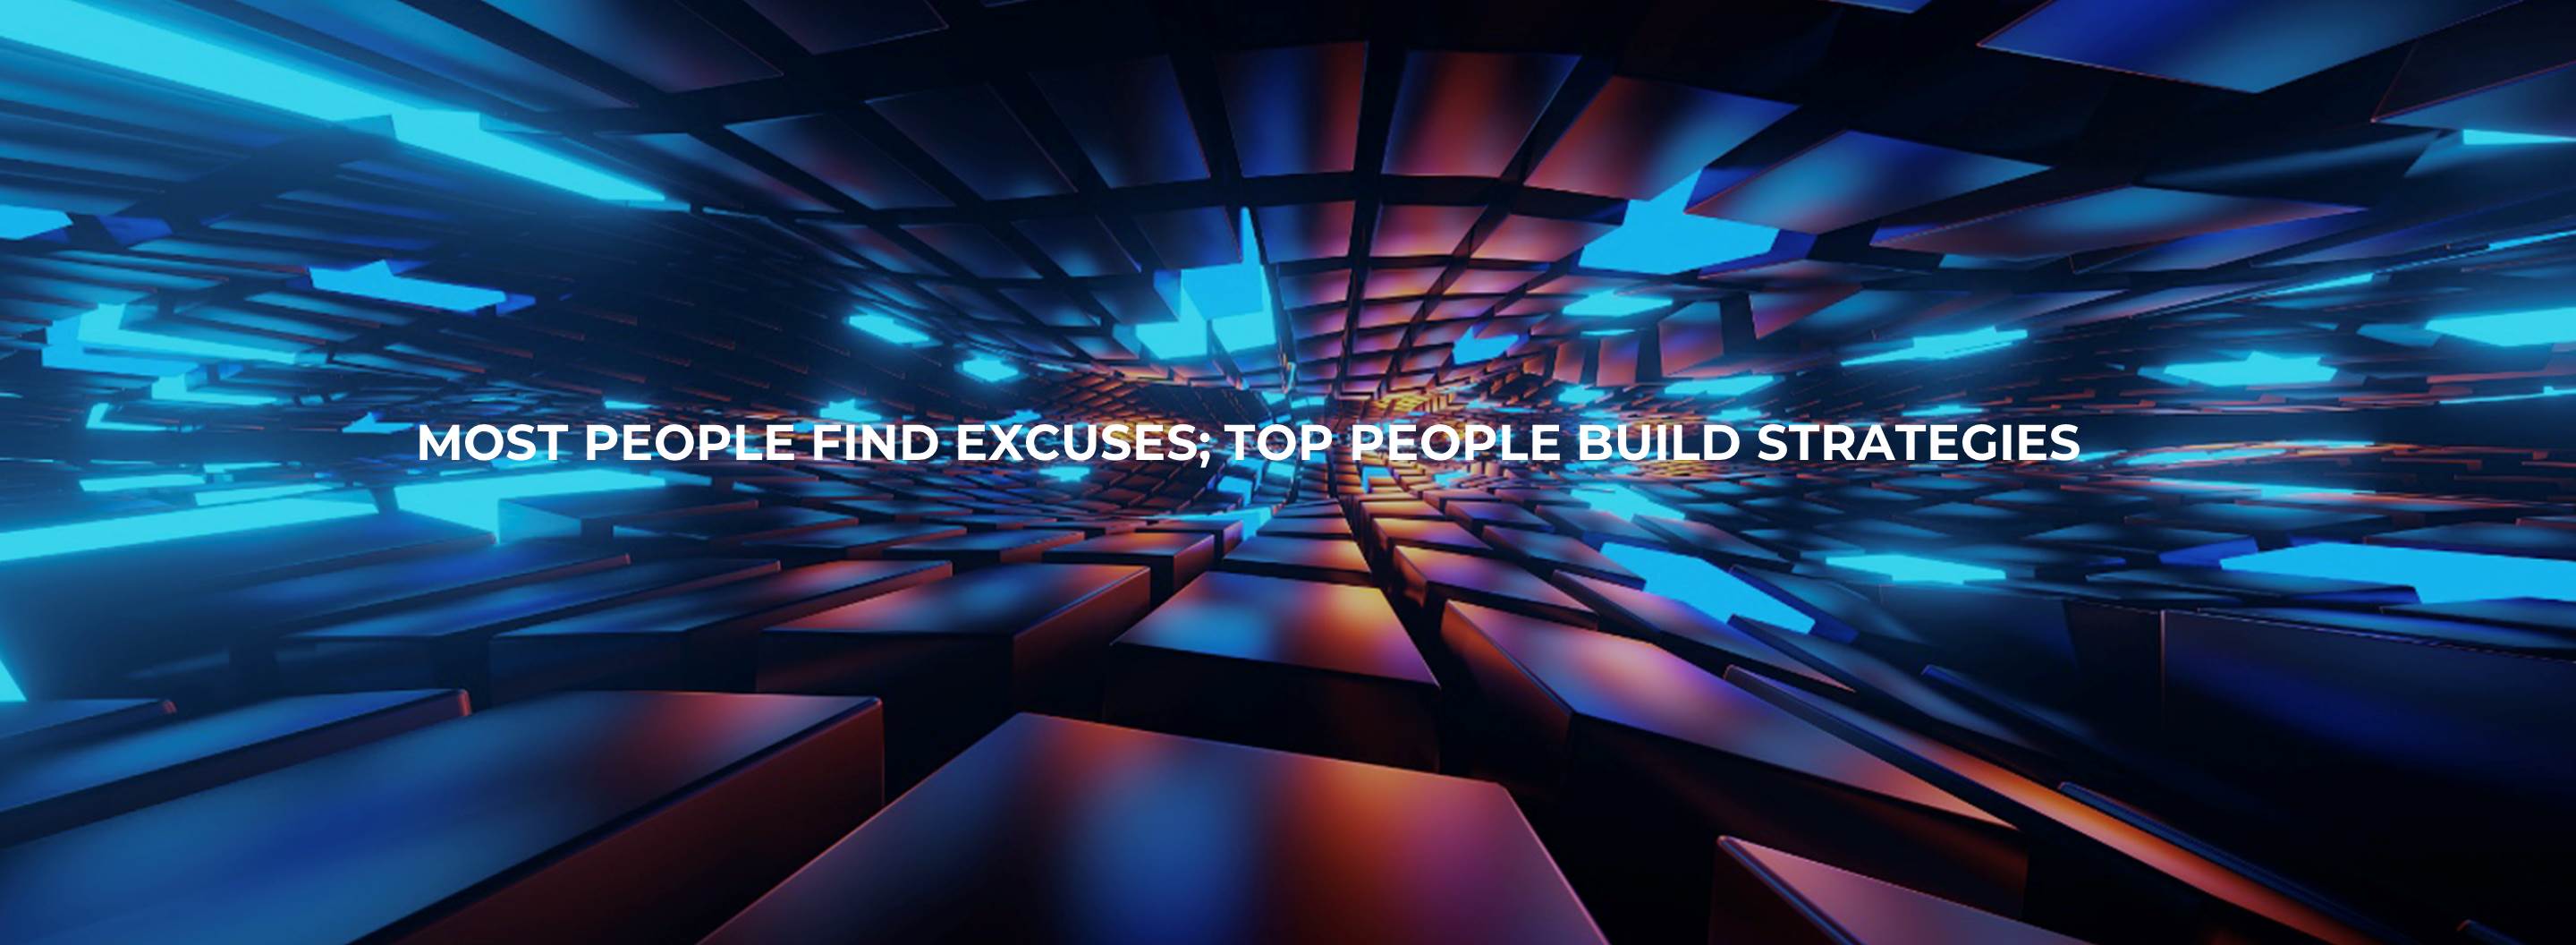 Most people find excuses